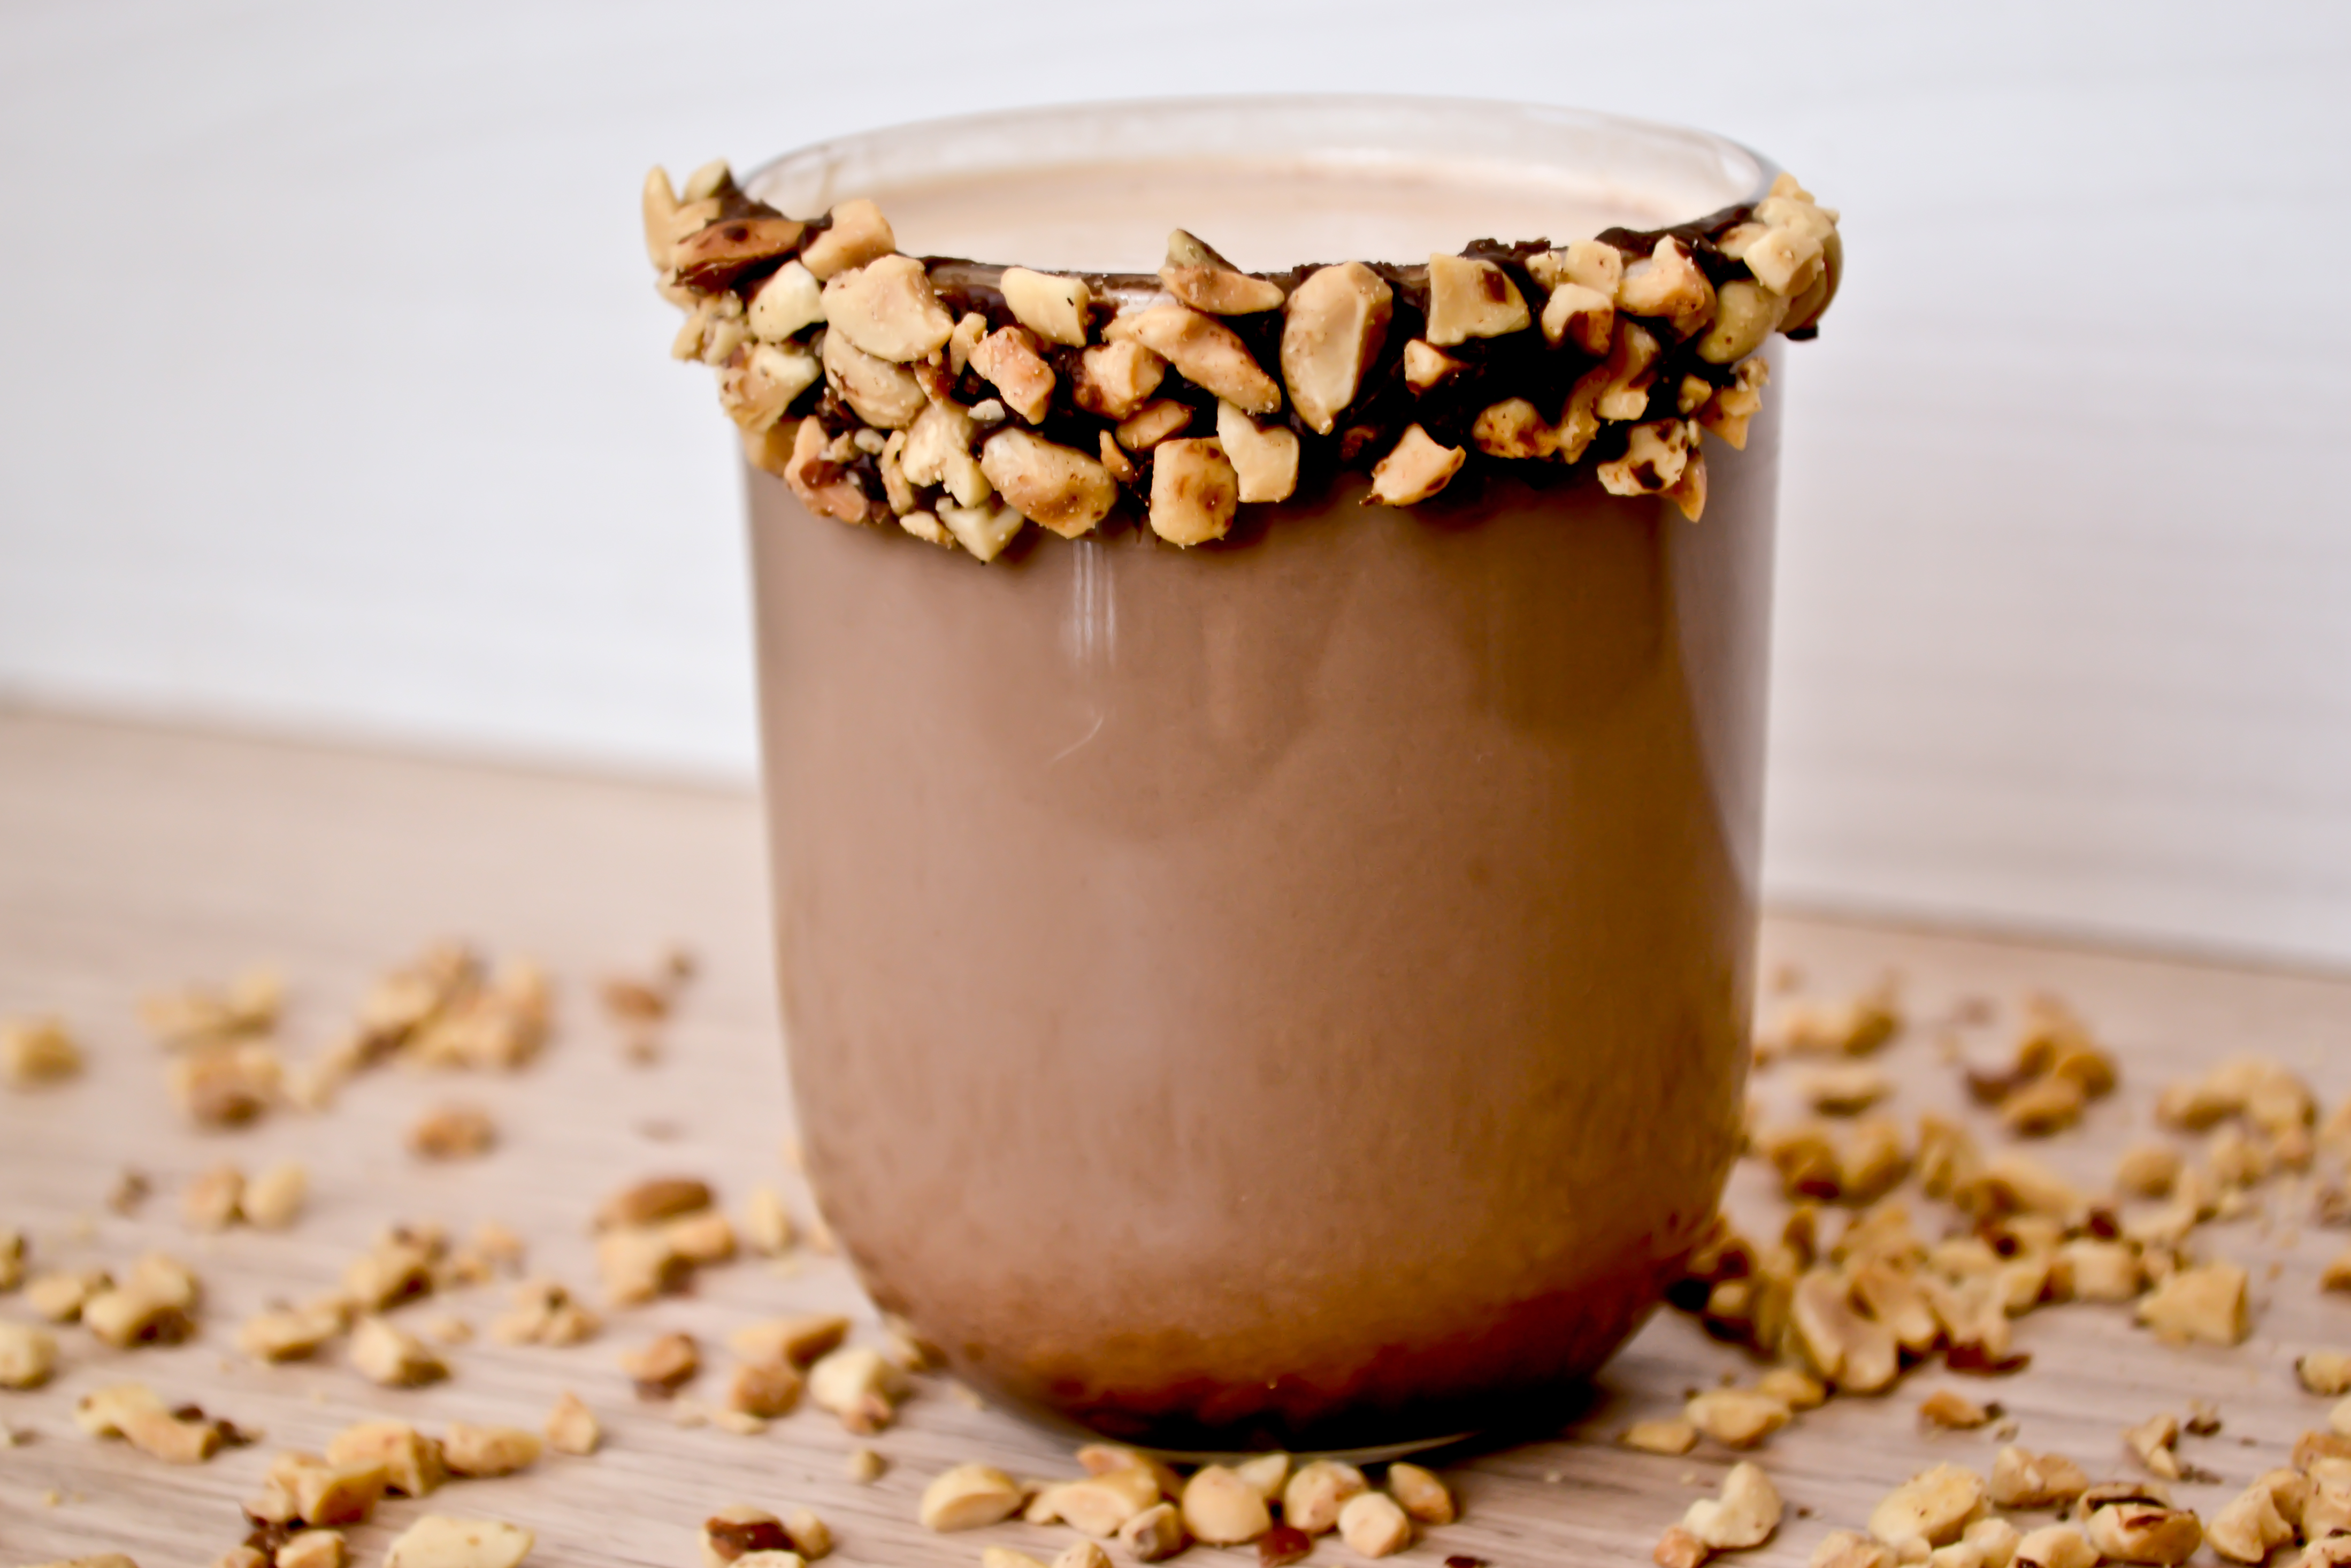 hot chocolate recipe with peanut butter